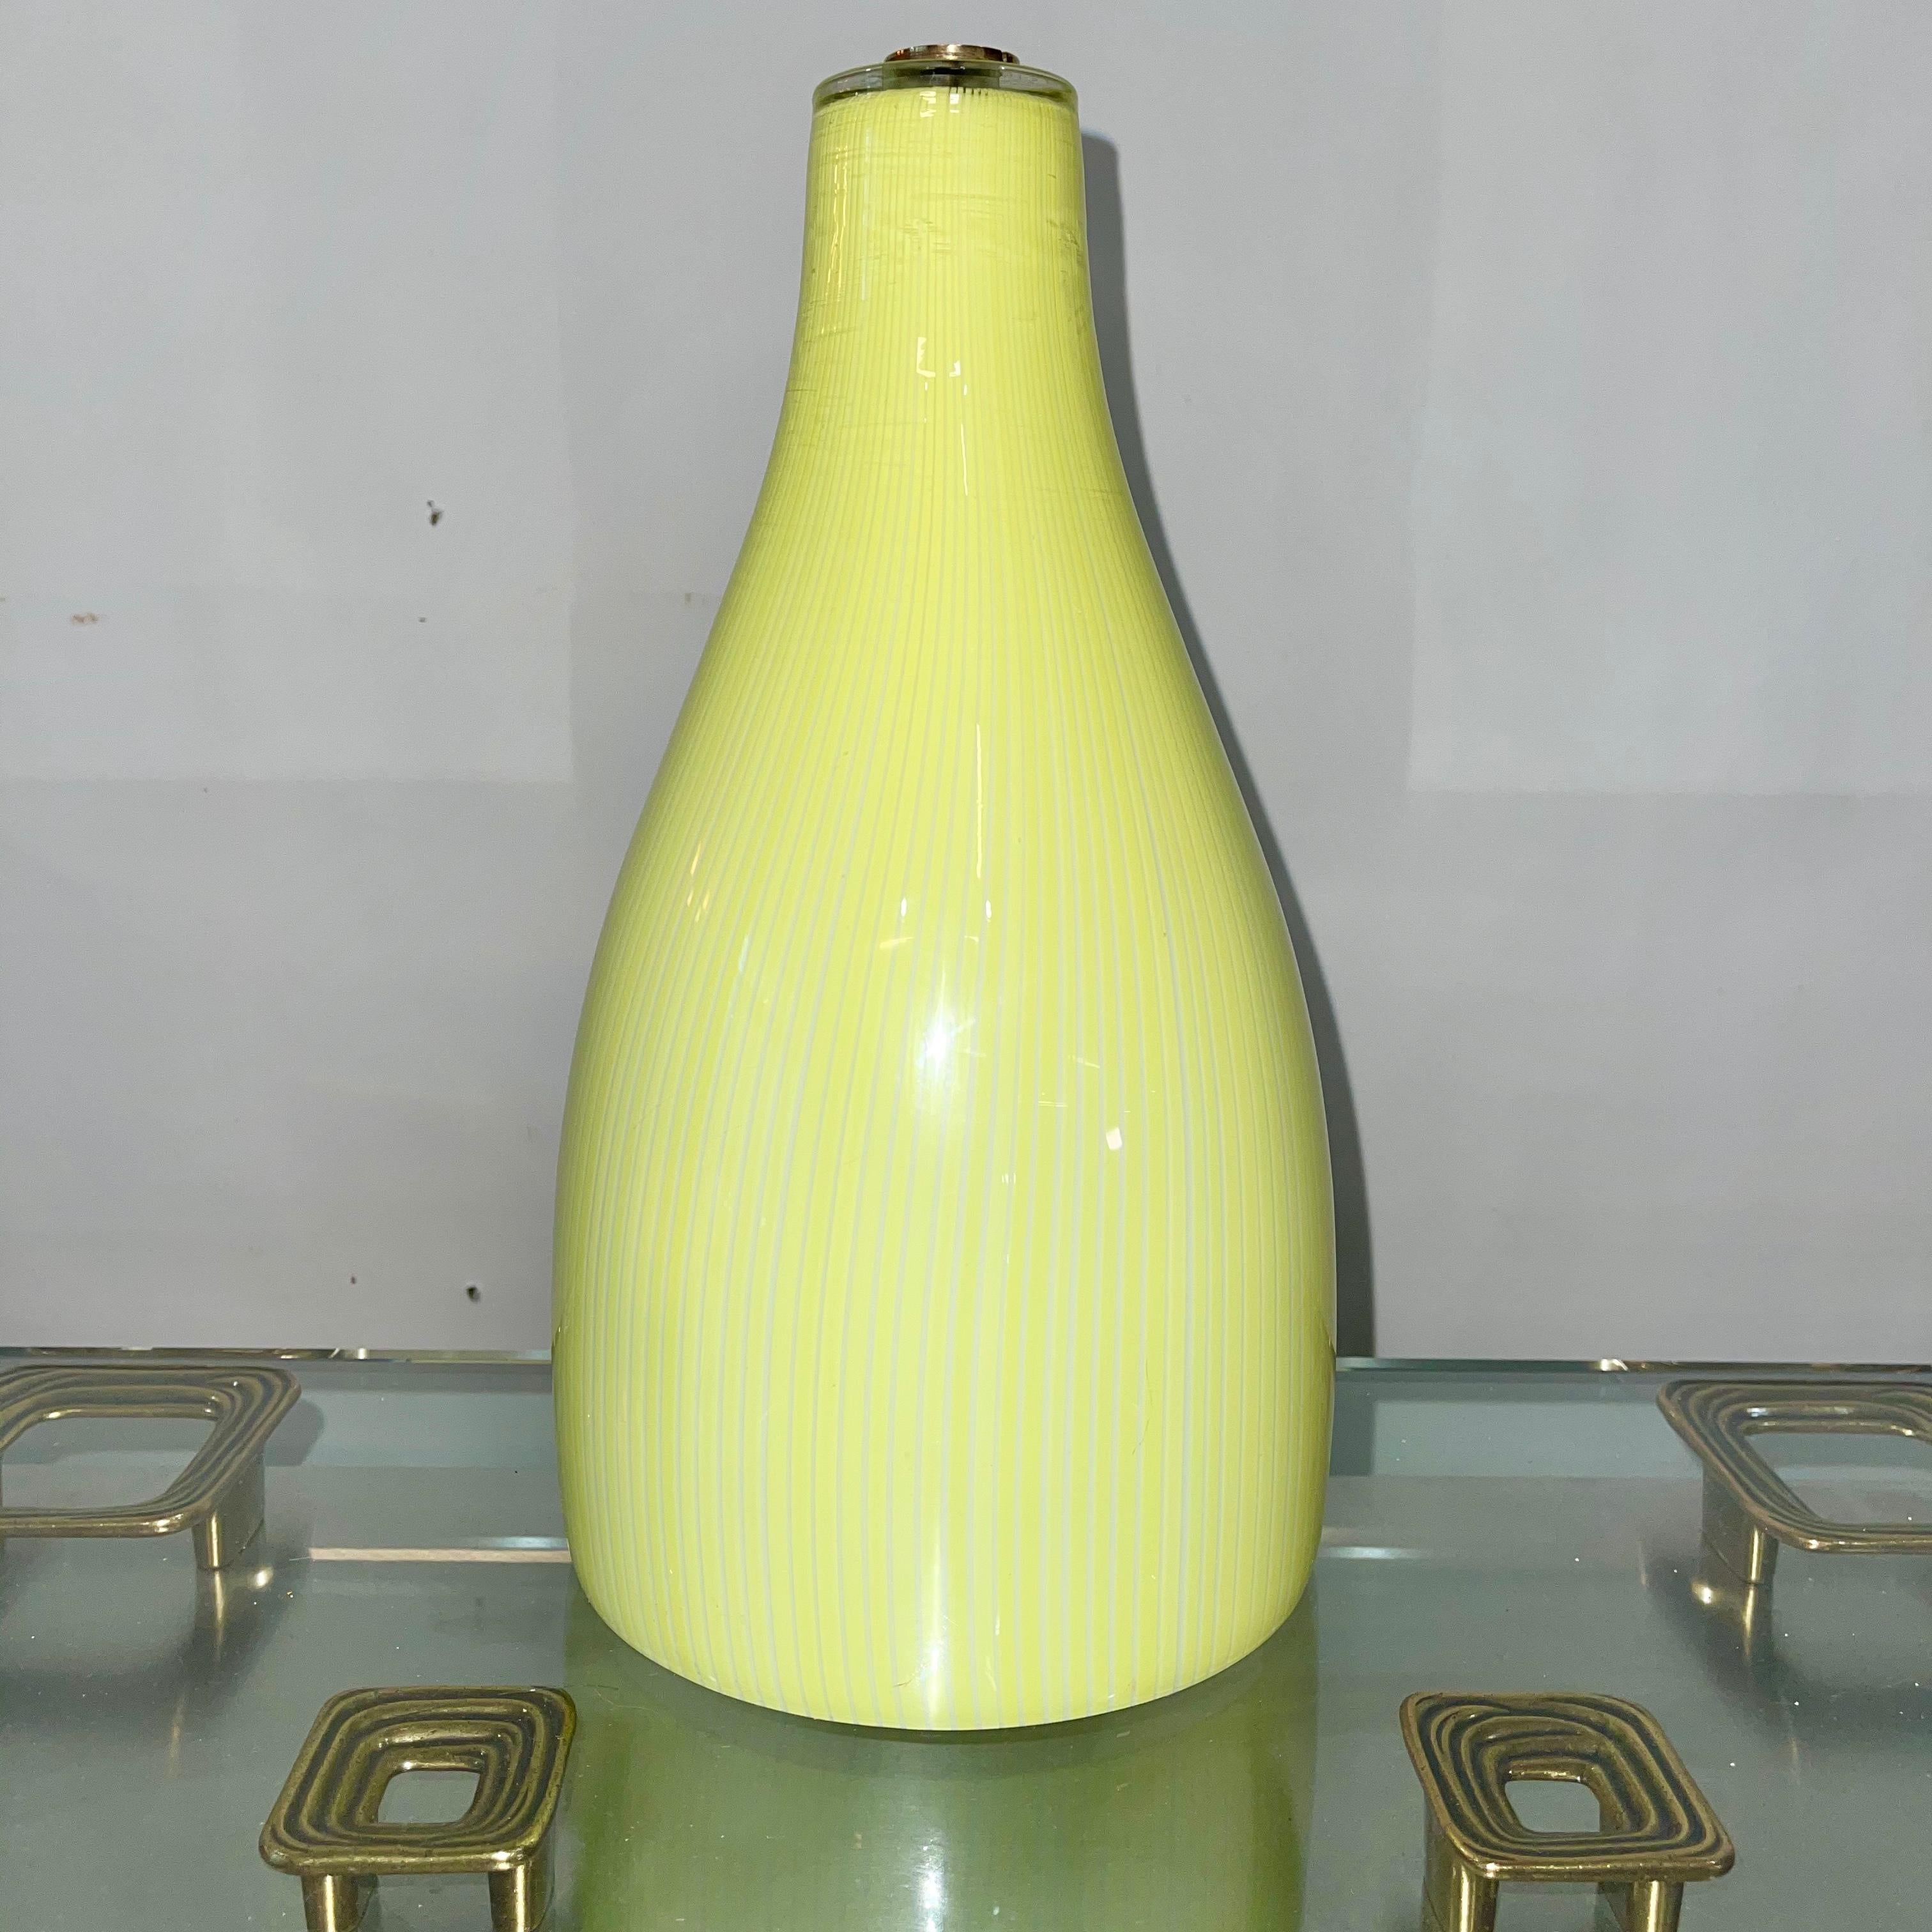 Since yellow Murano glass wall lamp designed by Massimo Vignelli for Venini, mid-1950s. Original hefty brass wall bracket. Porcelain socket for single standard Edison screw lightbulb up to 100 watts. Can be hardwired or corded.
Measures: W 16.0 x H